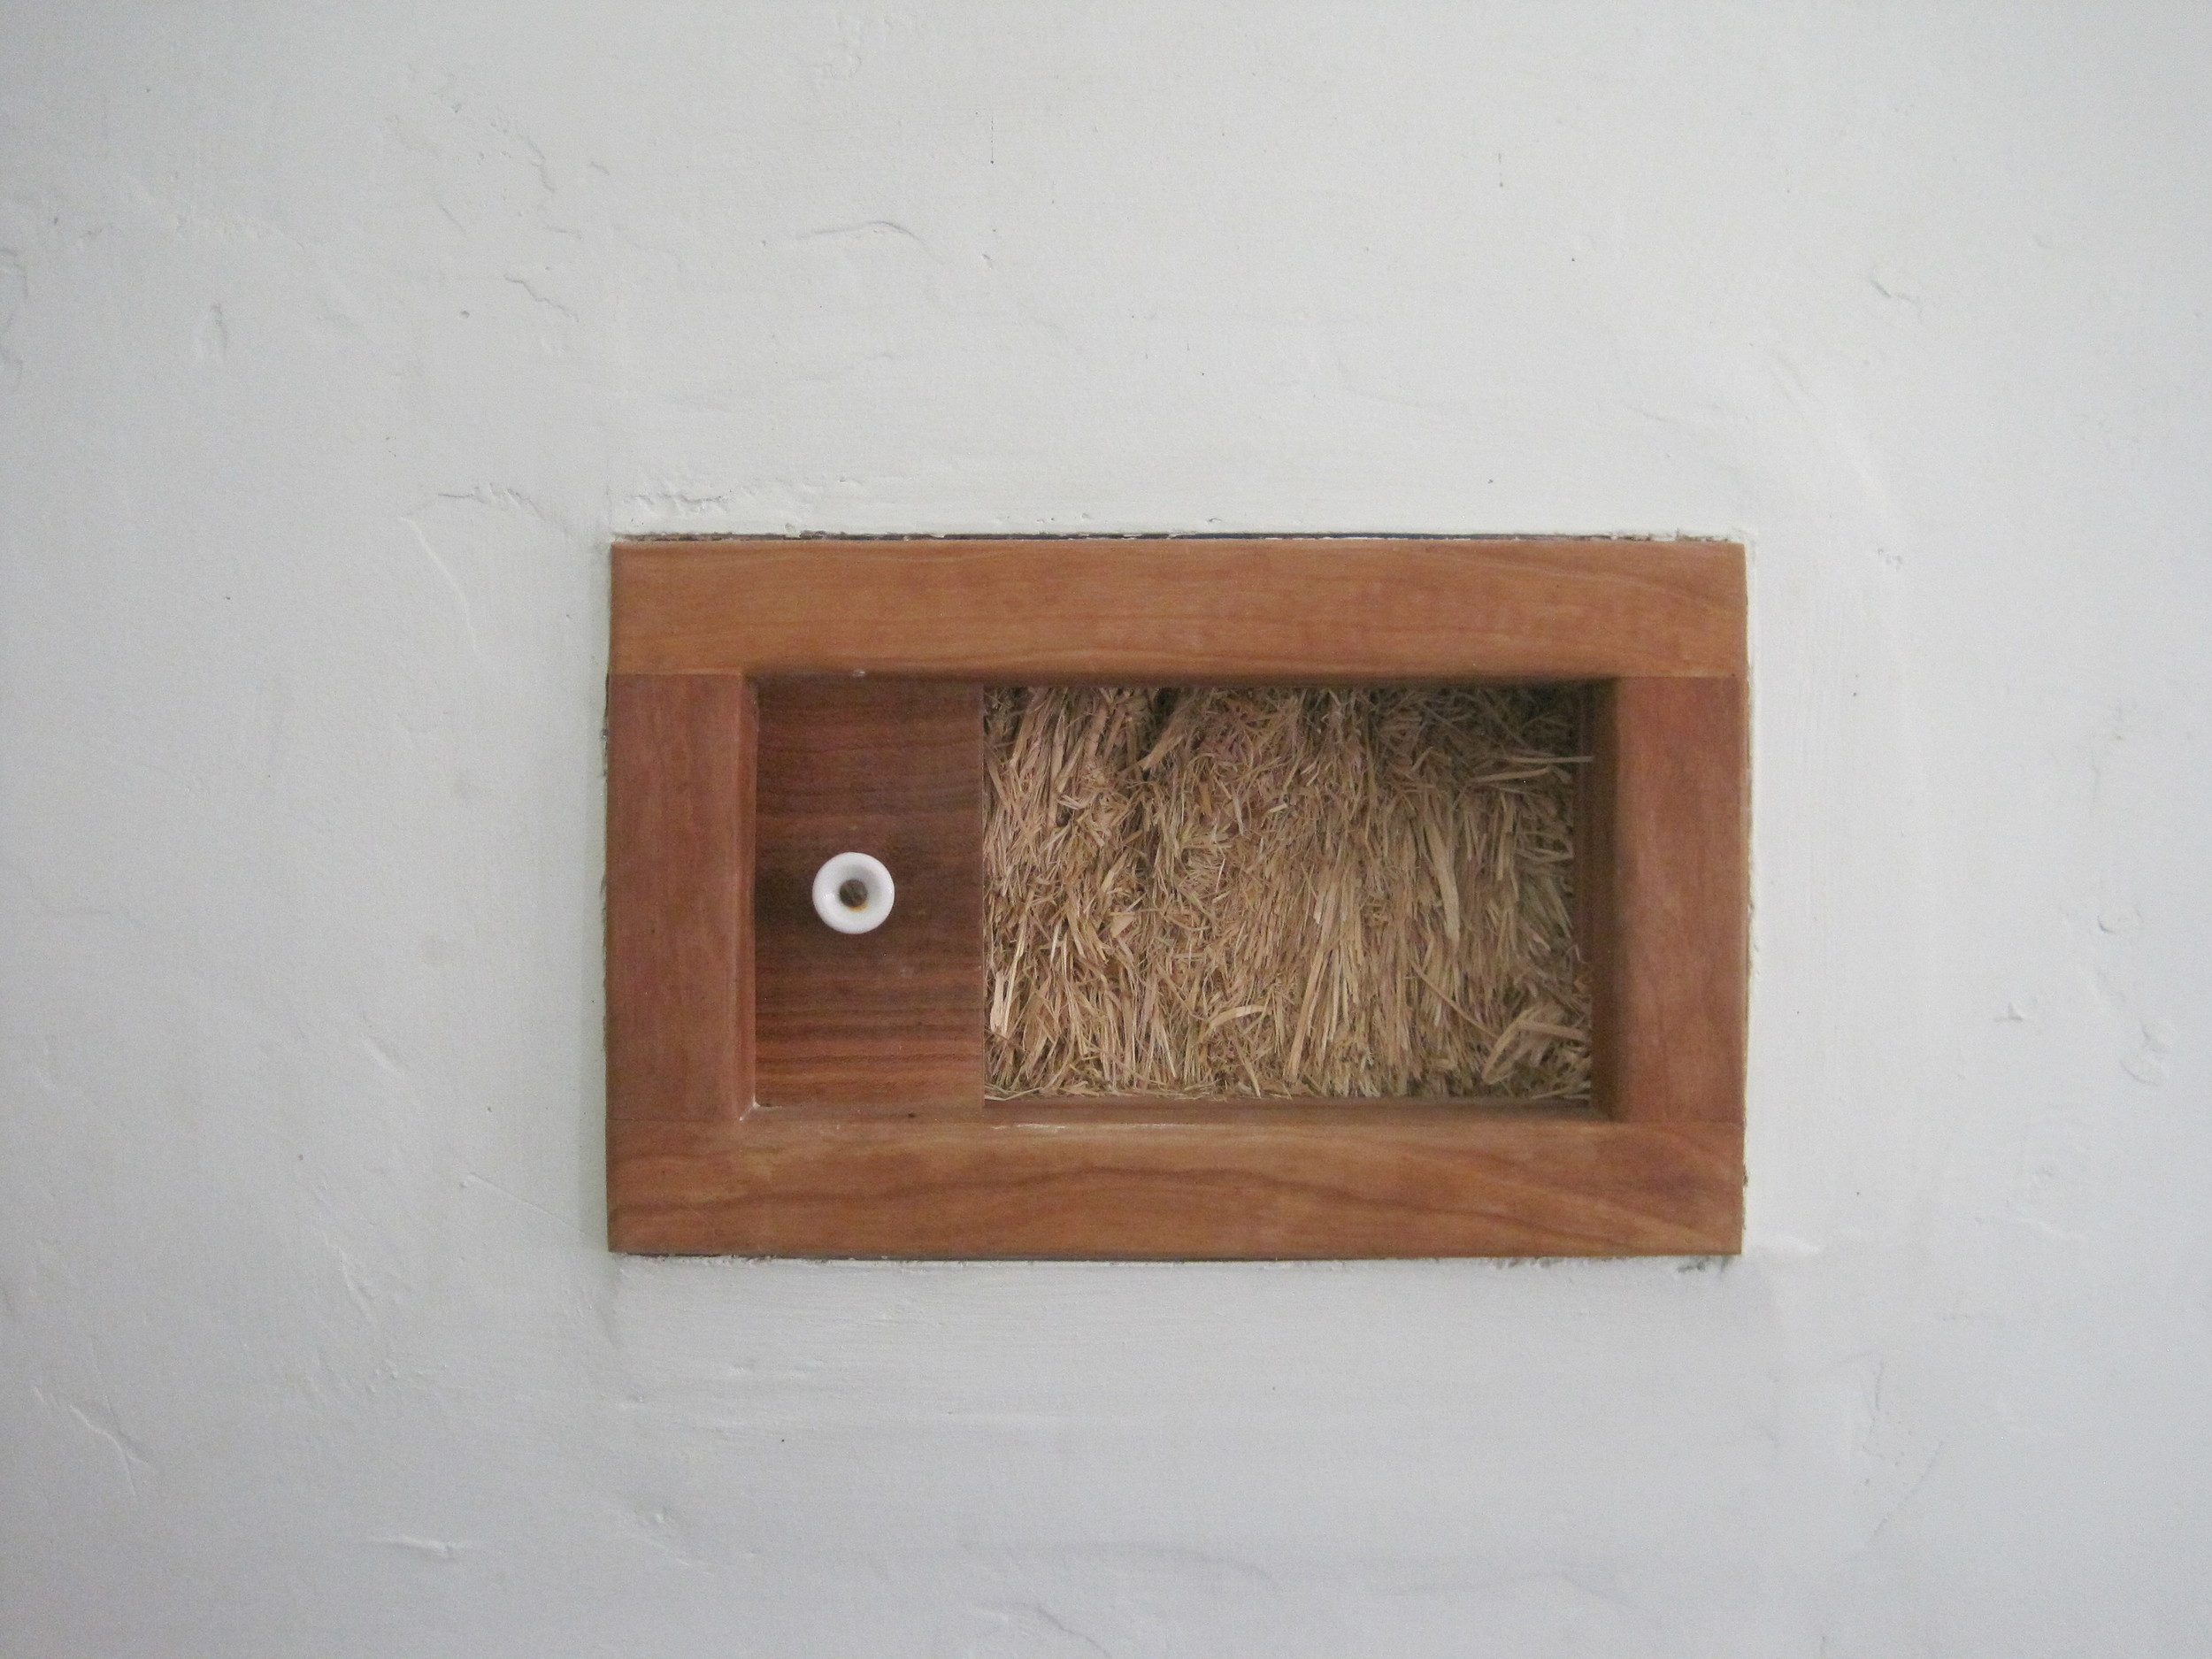   Truth window in the Straw Bale walls  